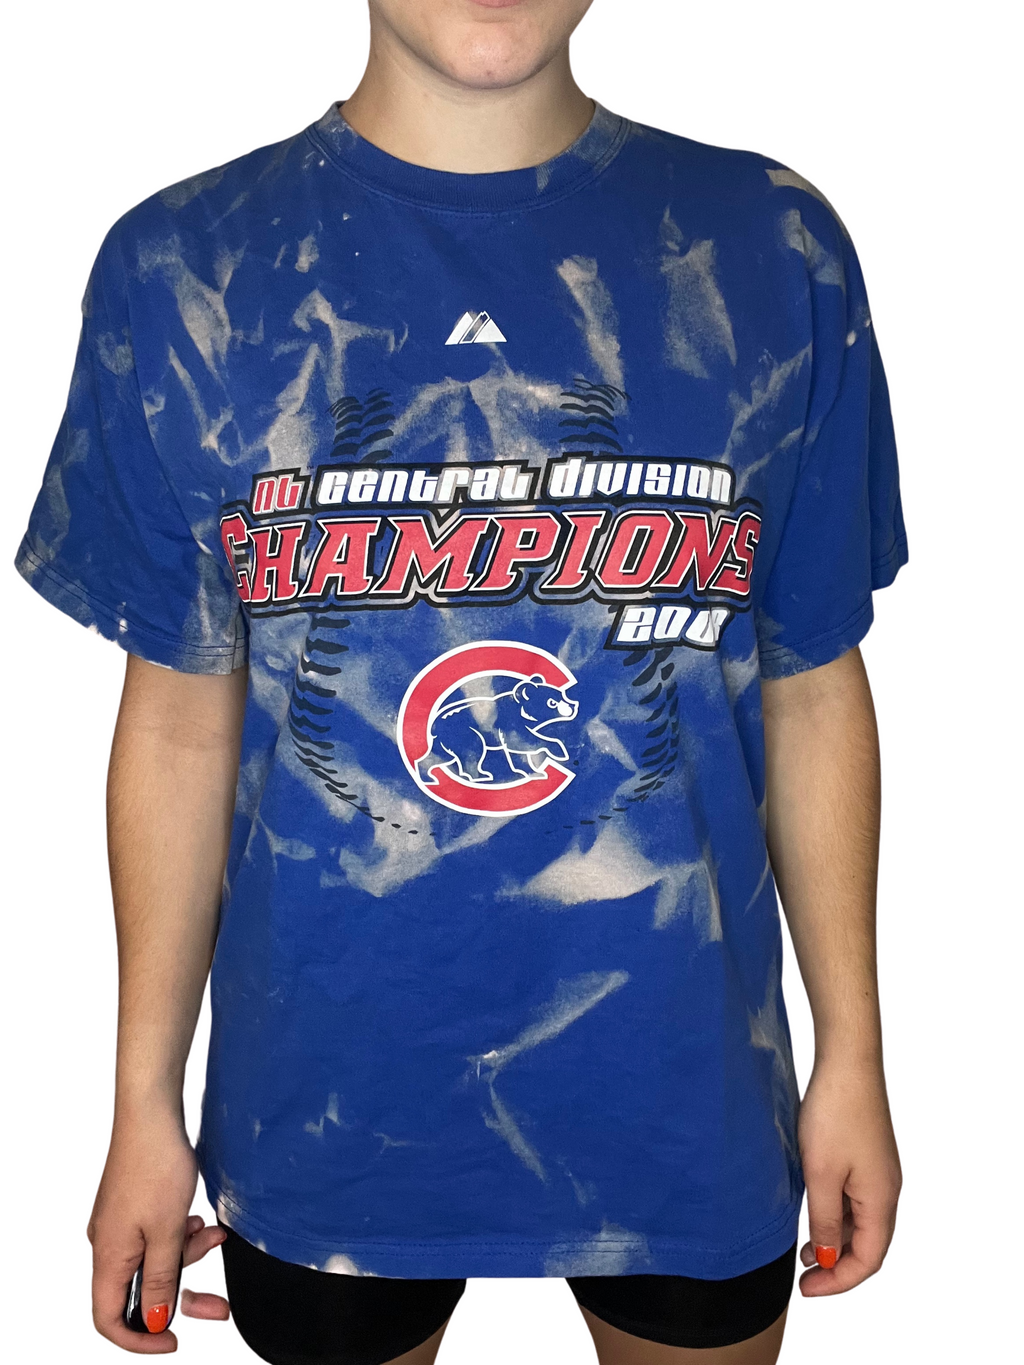 Chicago Cubs NL Central 2008 Champions Bleached Shirt